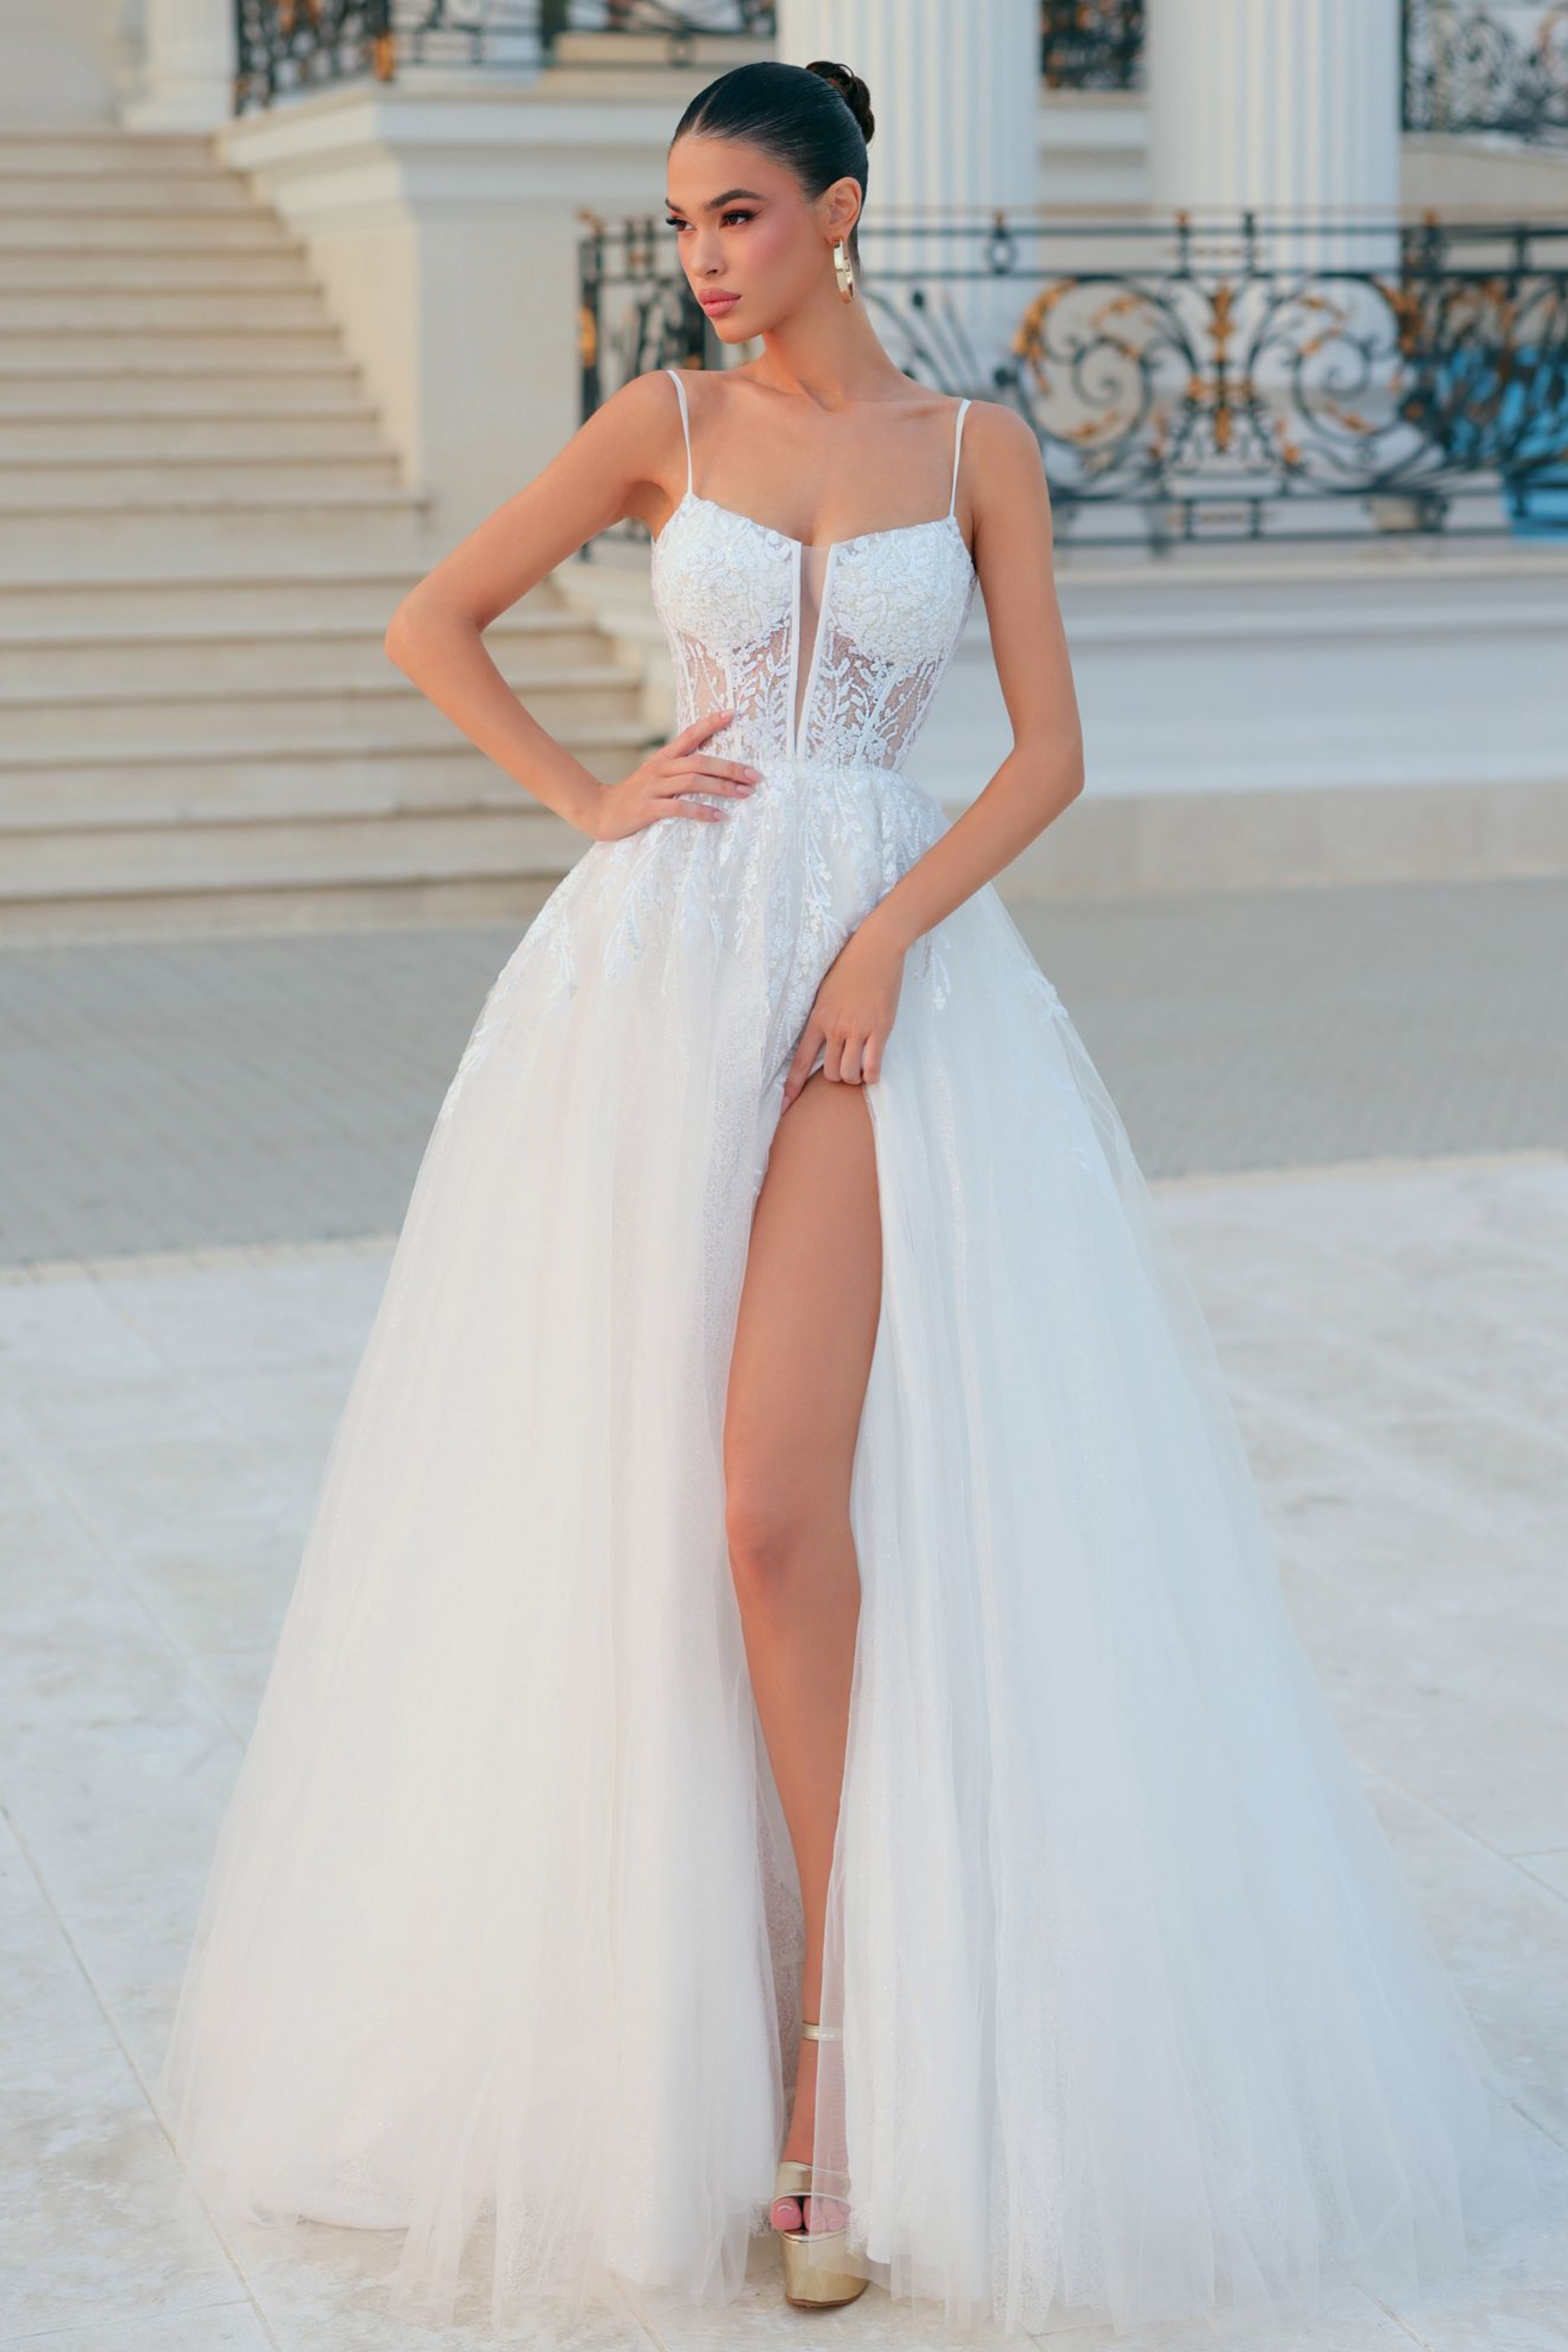 Tina Holly wedding dress with corseted lace bodice and attached overskirt with train in off white glitter tulle